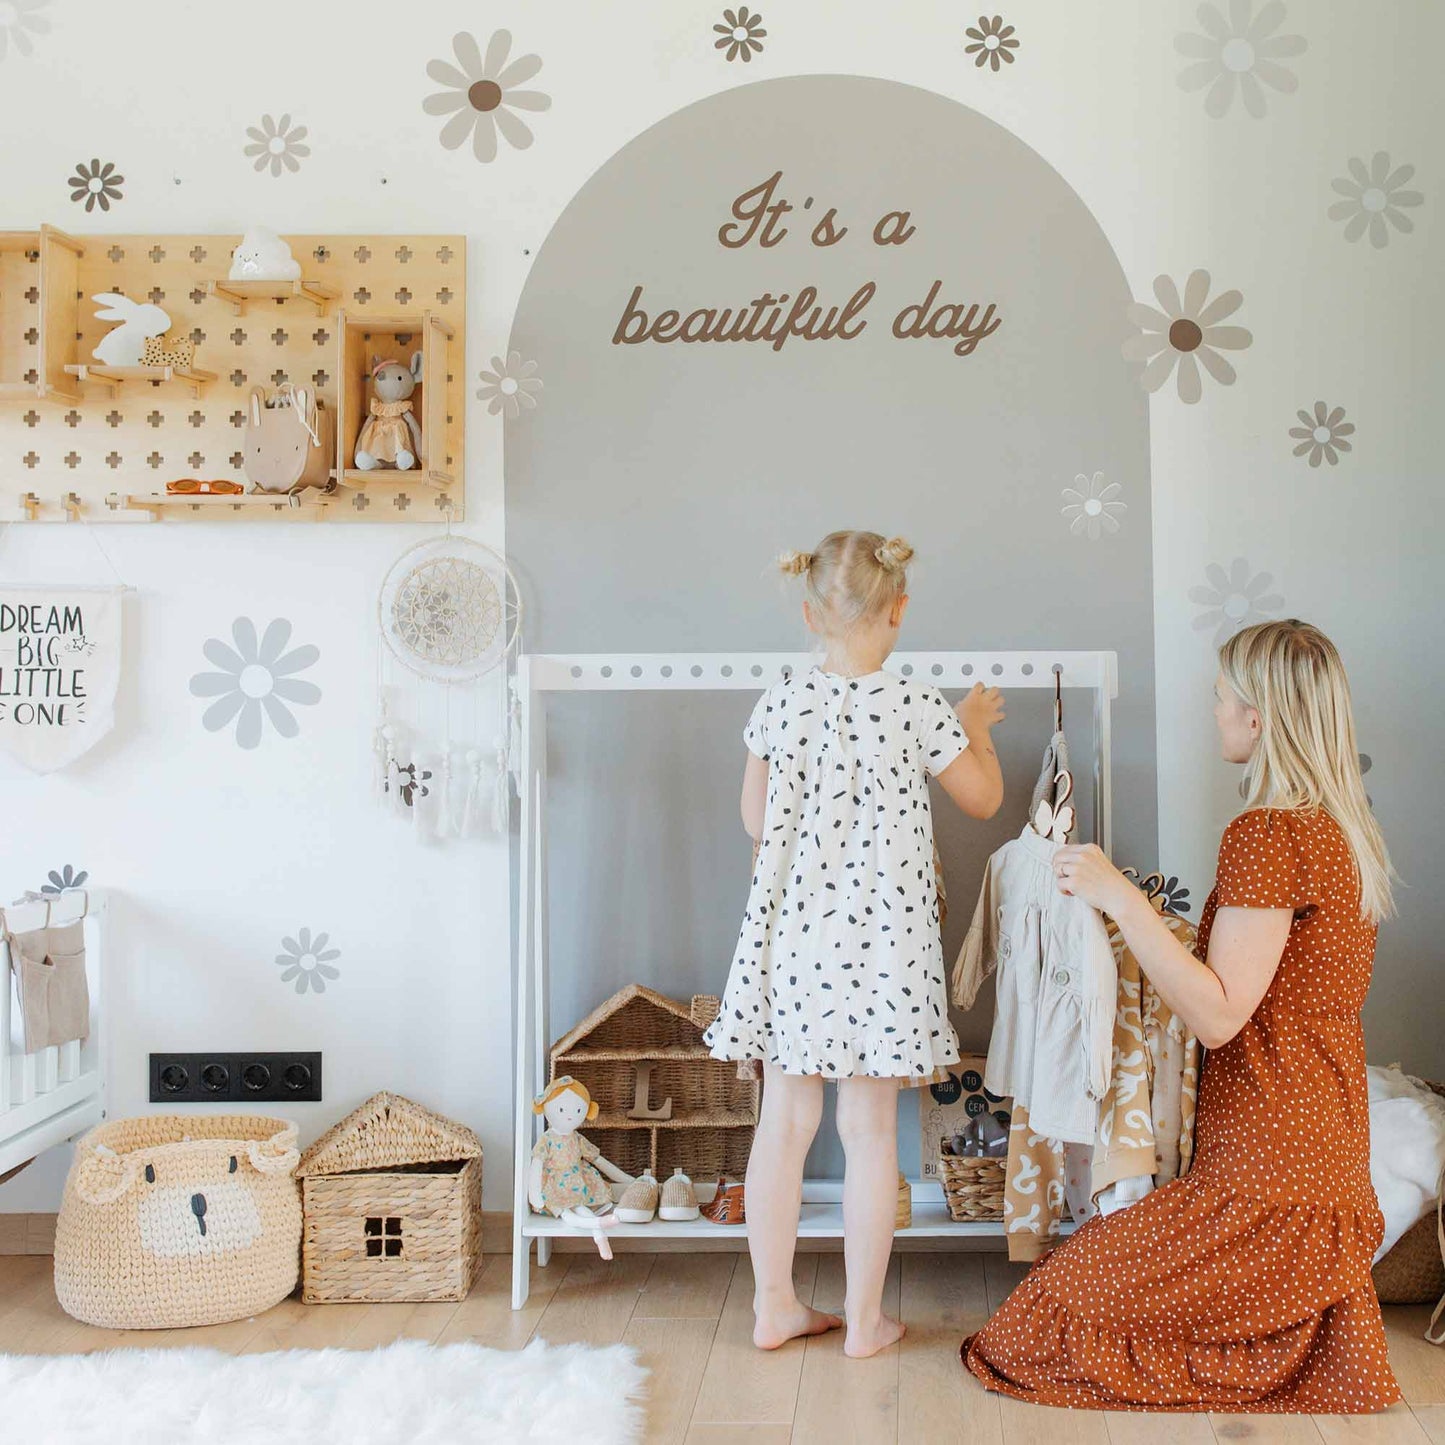 A woman and a child organize a dollhouse and toys in a room decorated with floral wall decals and text saying "It's a beautiful day." The woman is wearing a rust-colored dress, and the child is dressed in polka dots. In the corner, an open A-frame kids' clothing rack showcases their neatly arranged outfits.